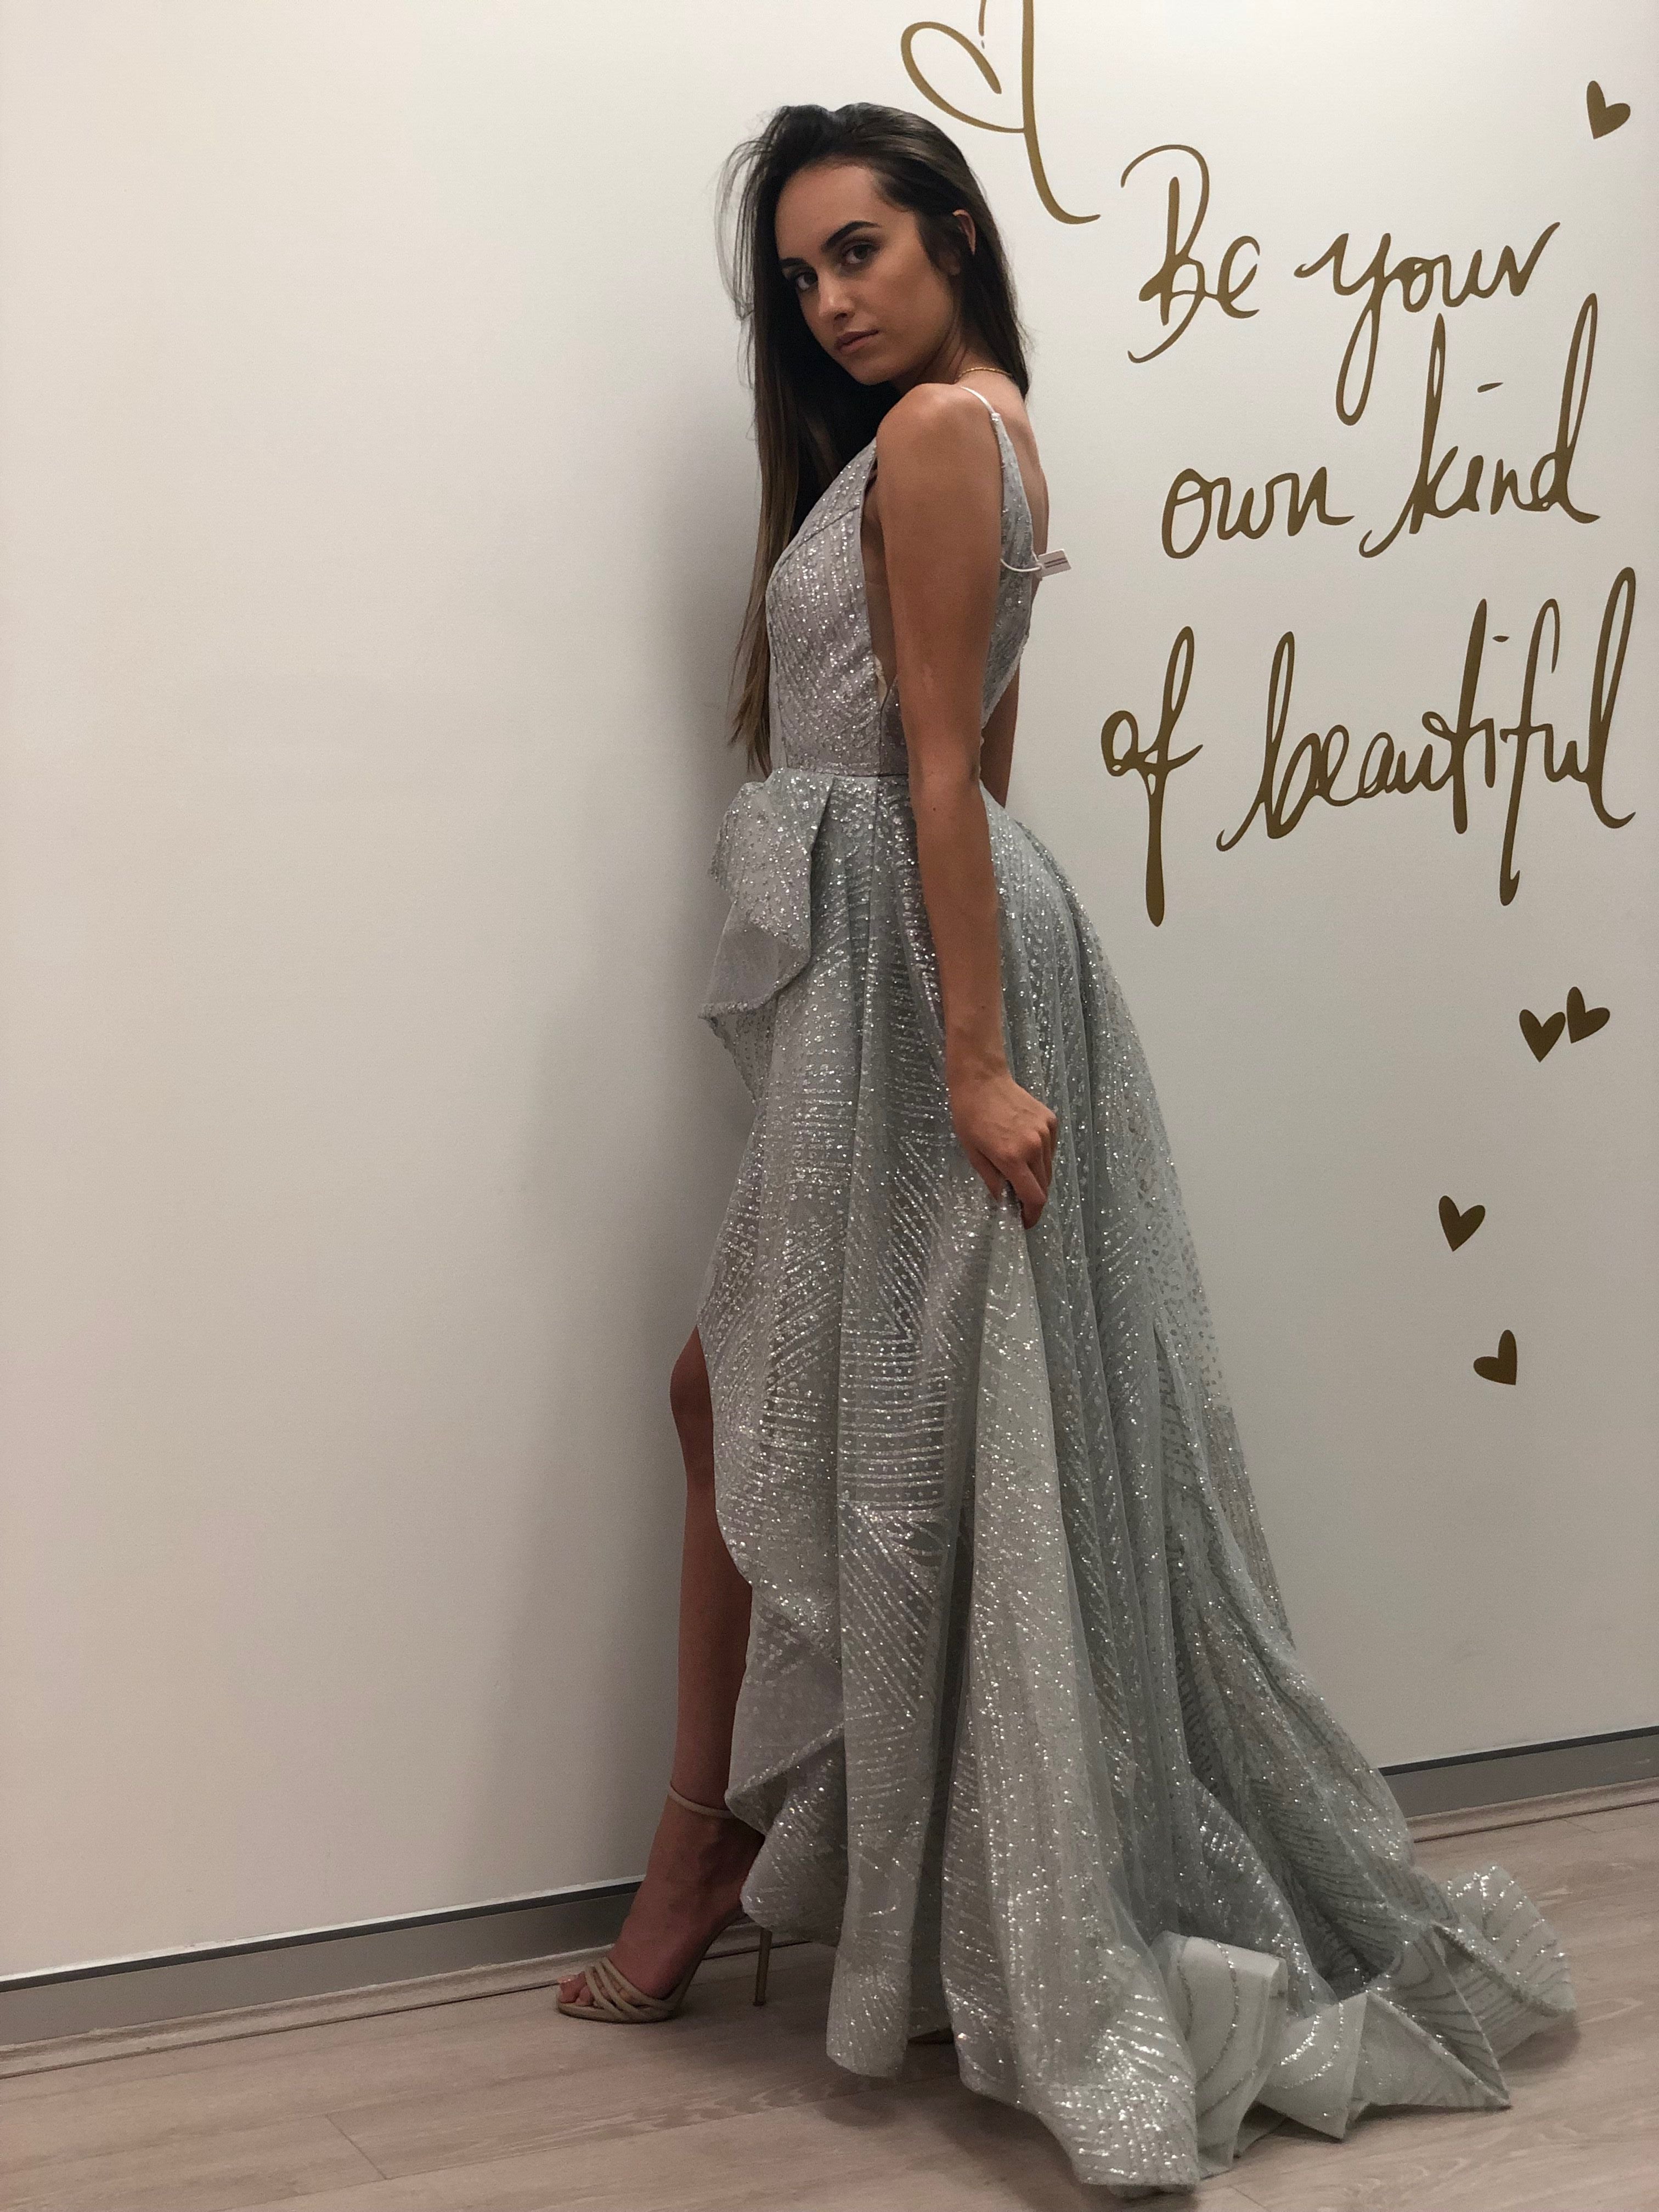 Tinaholy Couture T1844 Silver Grey Glitter Drape Mermaid Formal Gown Prom Dress Tina Holly Couture$ AfterPay Humm ZipPay LayBuy Sezzle